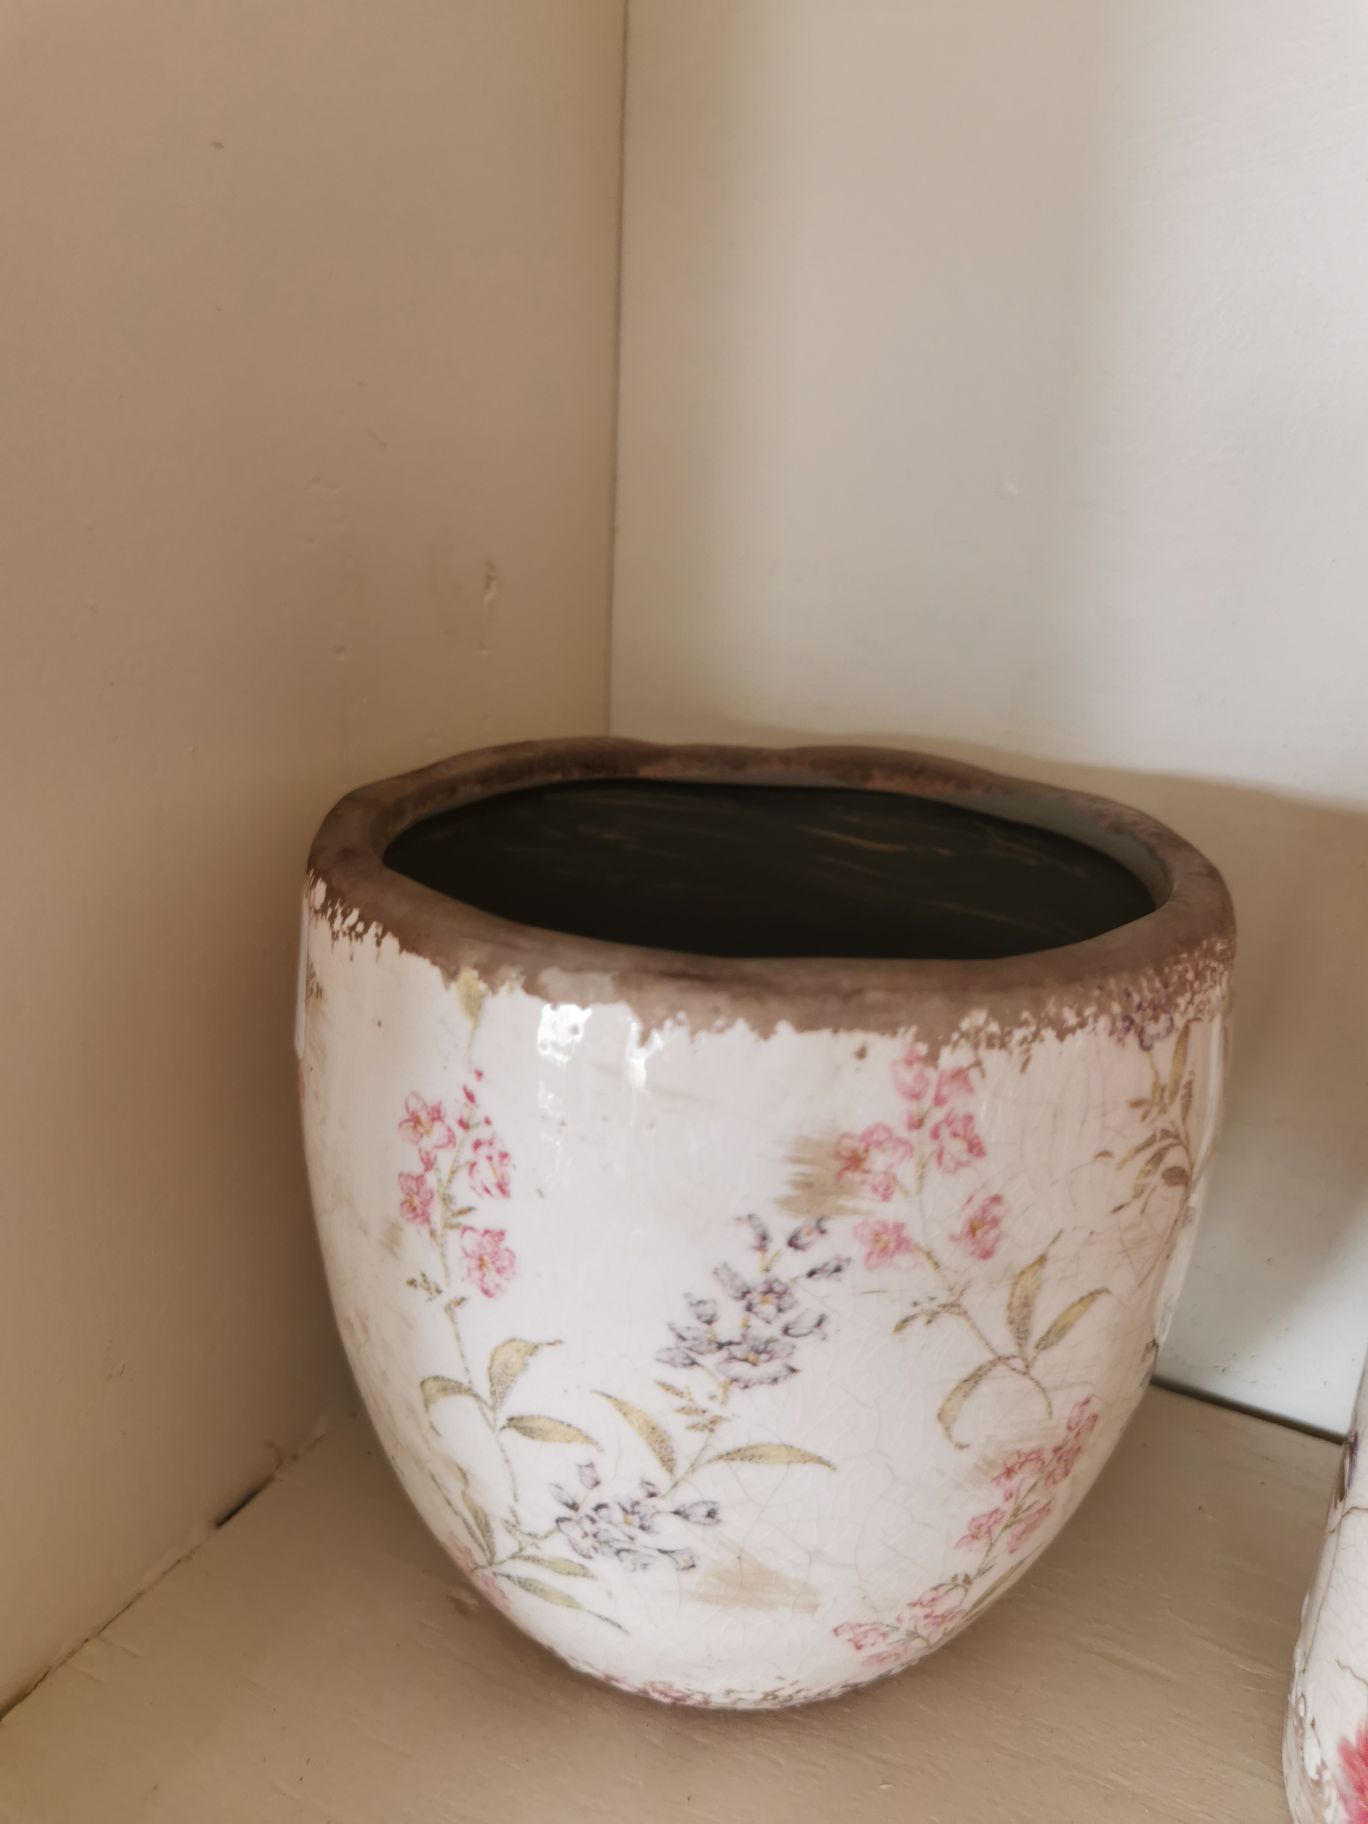 Plant pot with muted red and black flowers